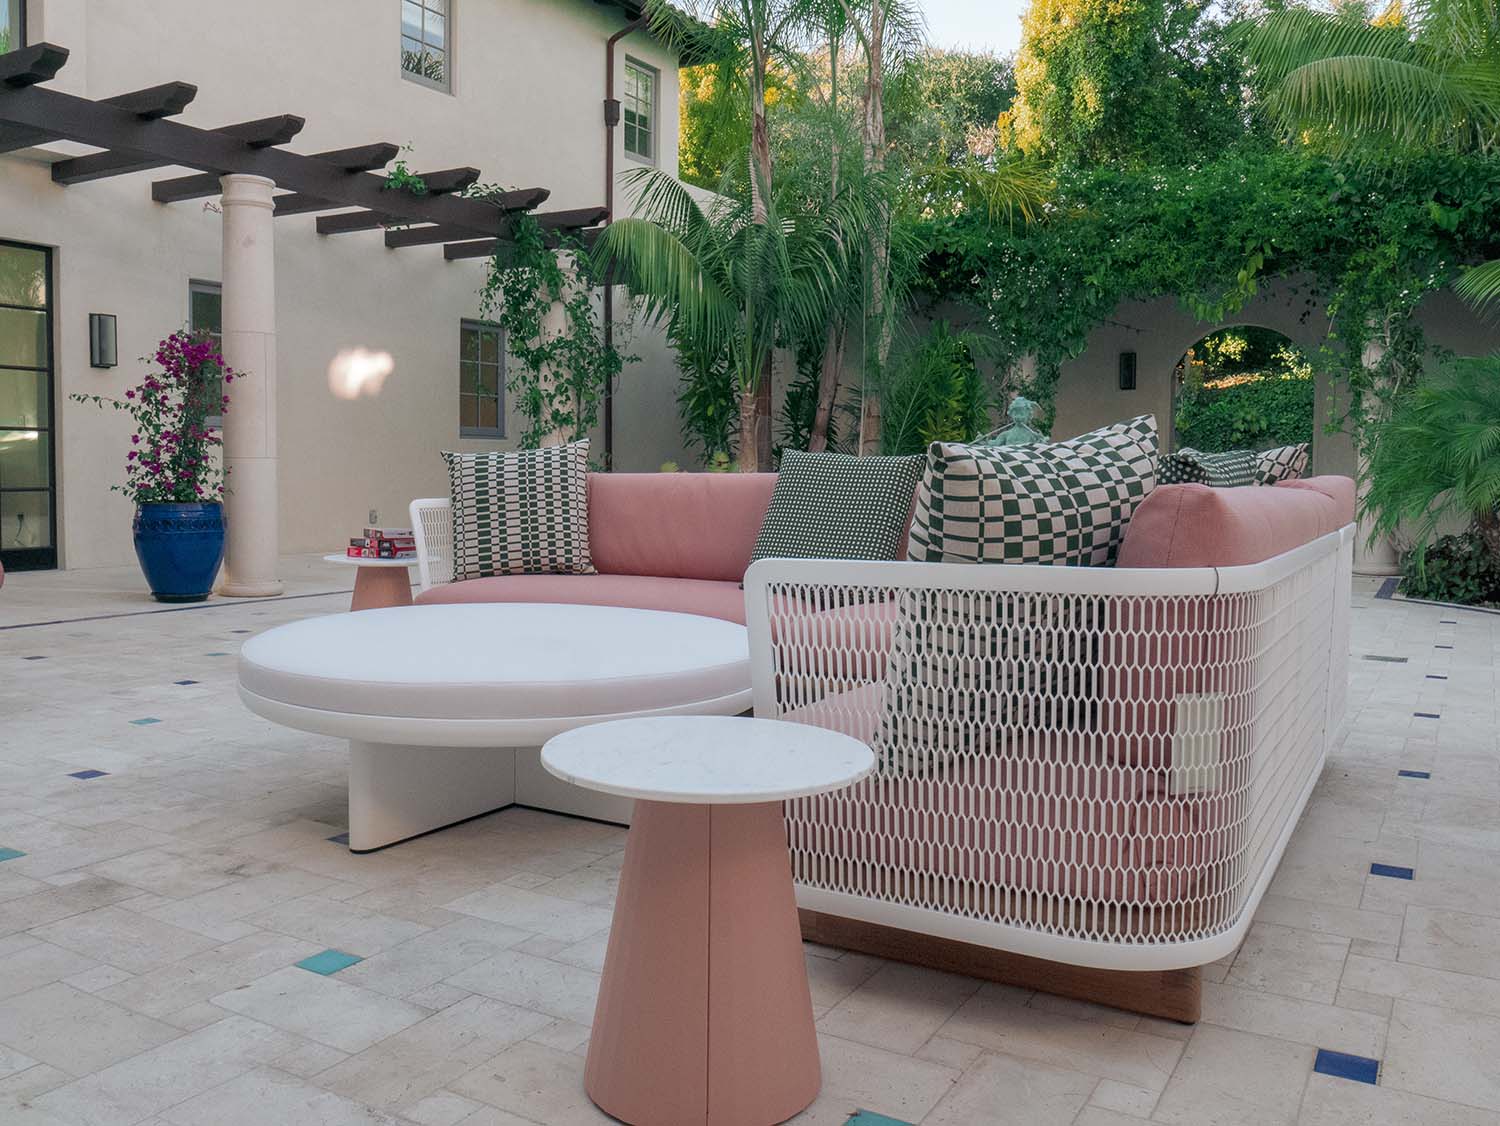 What Makes A Great Patio Design?